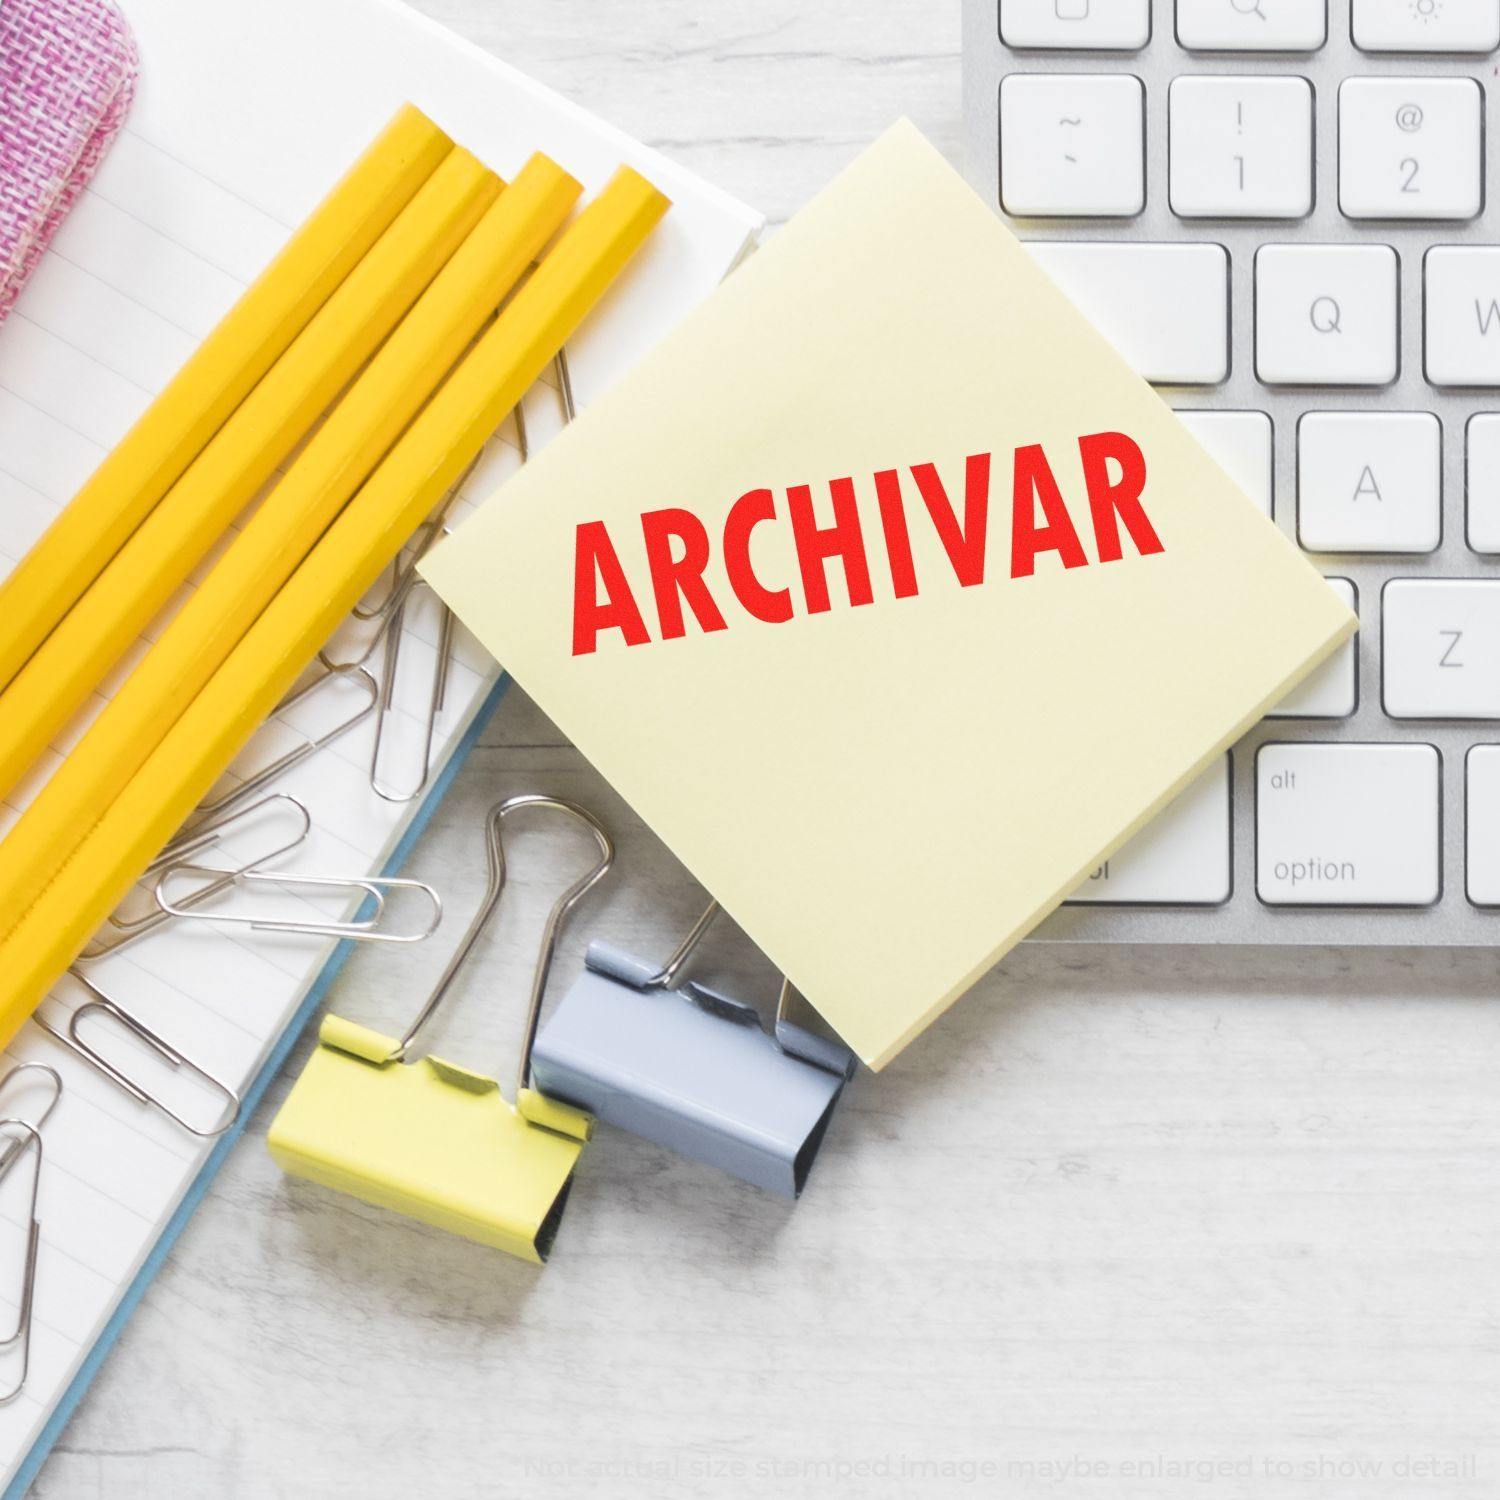 A self-inking stamp with a stamped image showing how the text "ARCHIVAR" in a large font is displayed by it after stamping.